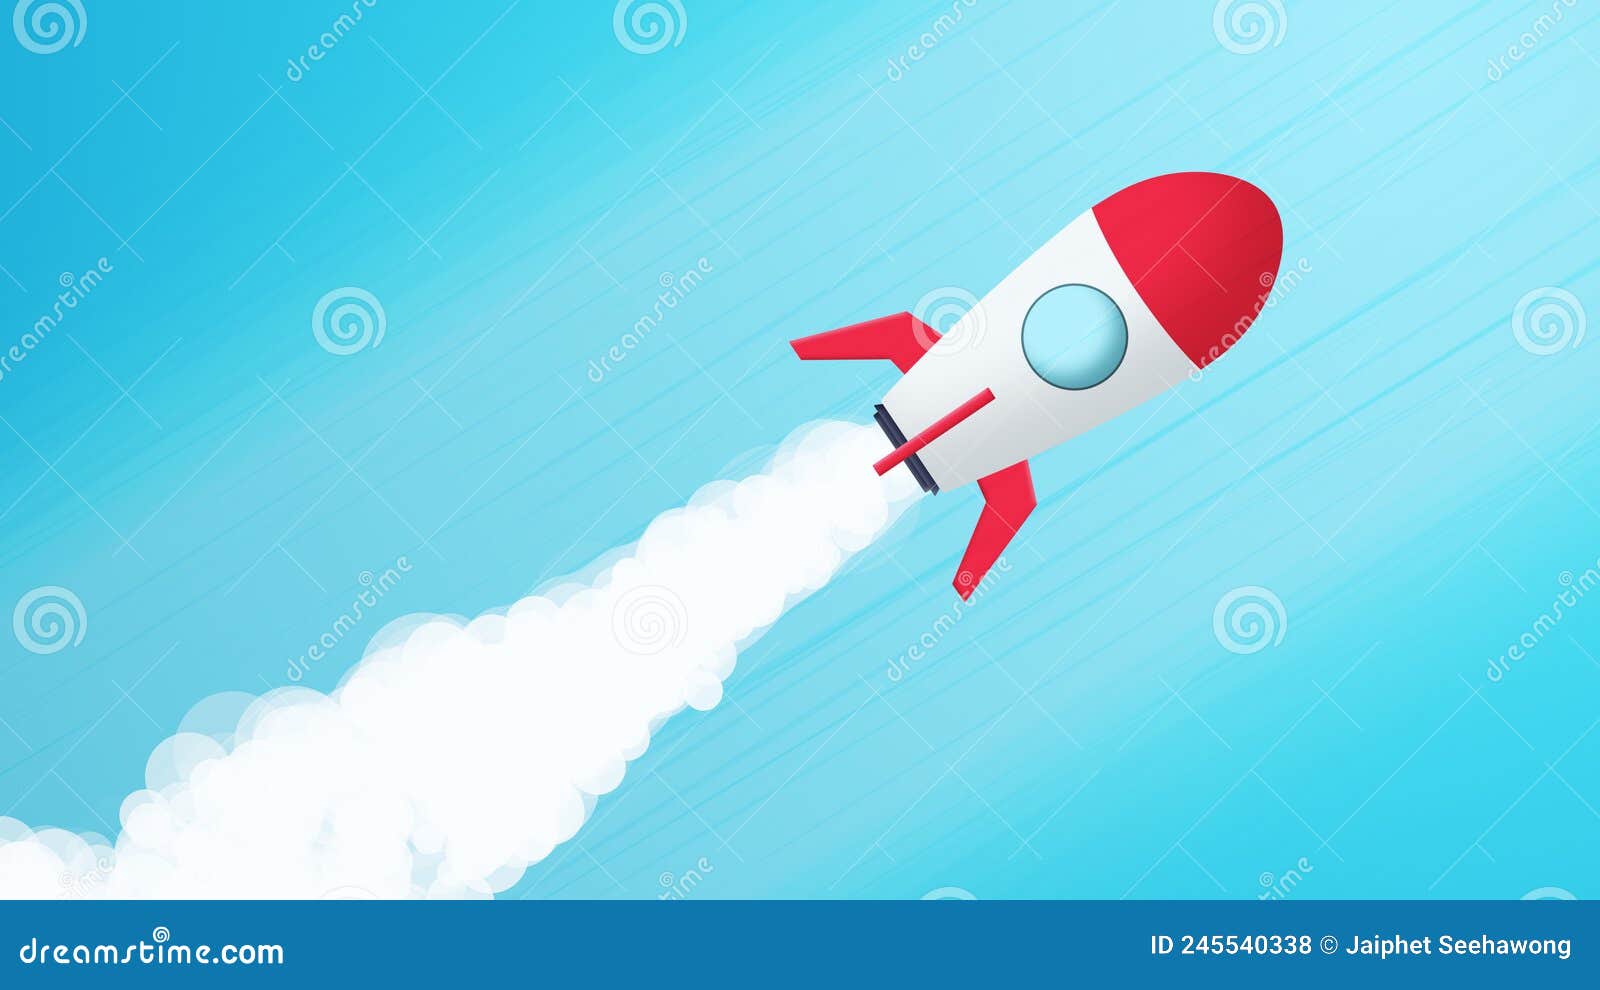 Cartoon Startup Rocket Jet Super Fast Speed Lines Flying into the Blue Sky  Background Stock Photo - Image of mission, goal: 245540338